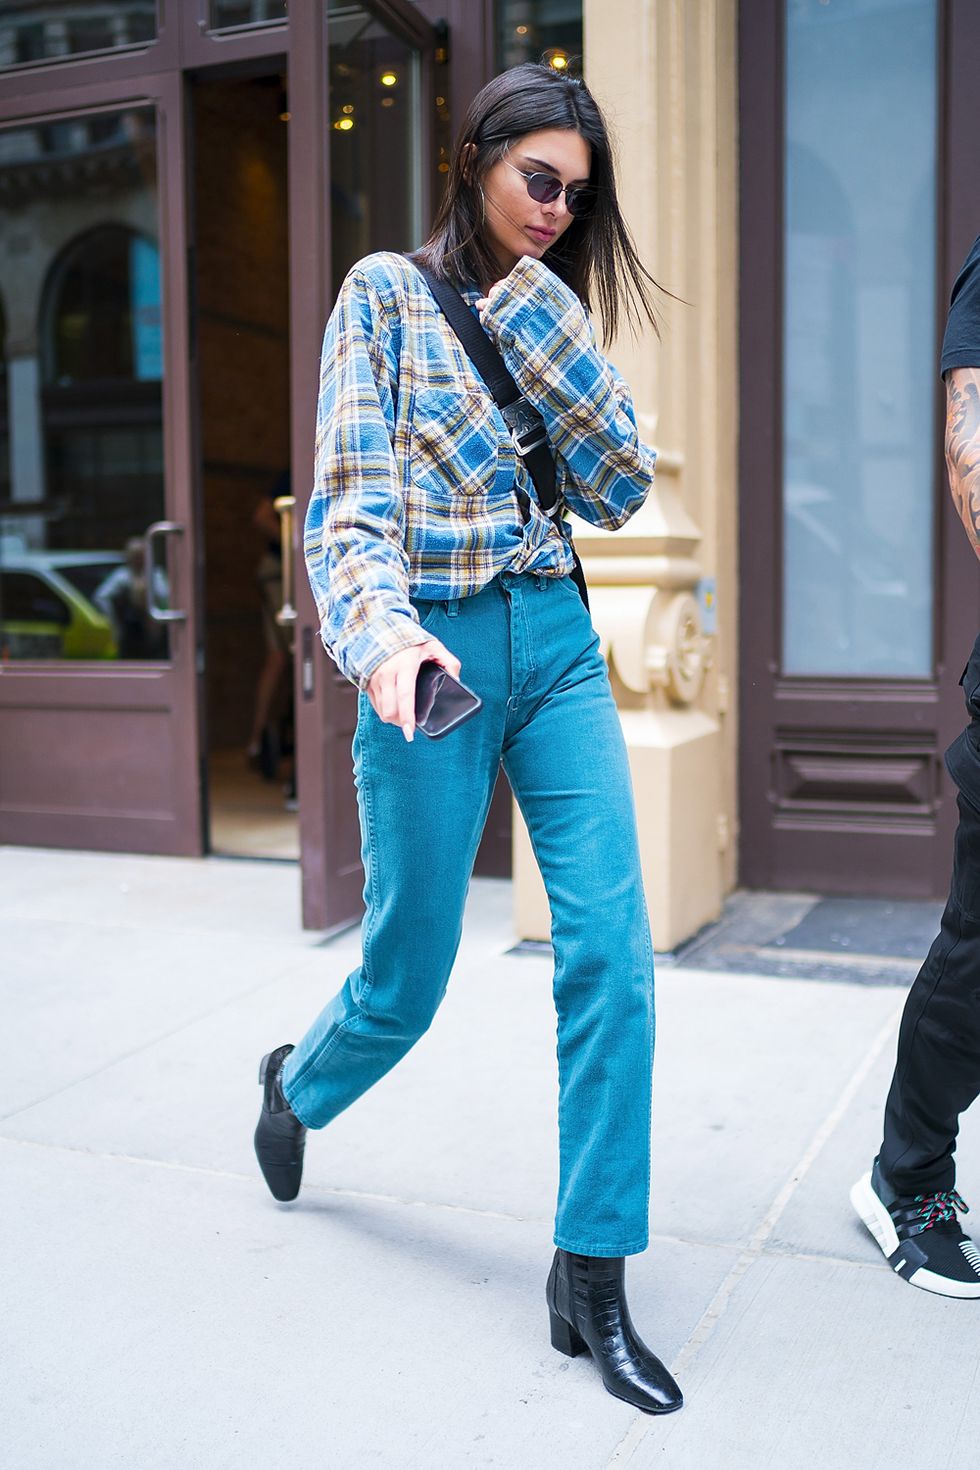 jeans autunno 2018 moda anni 90 kendall jenner